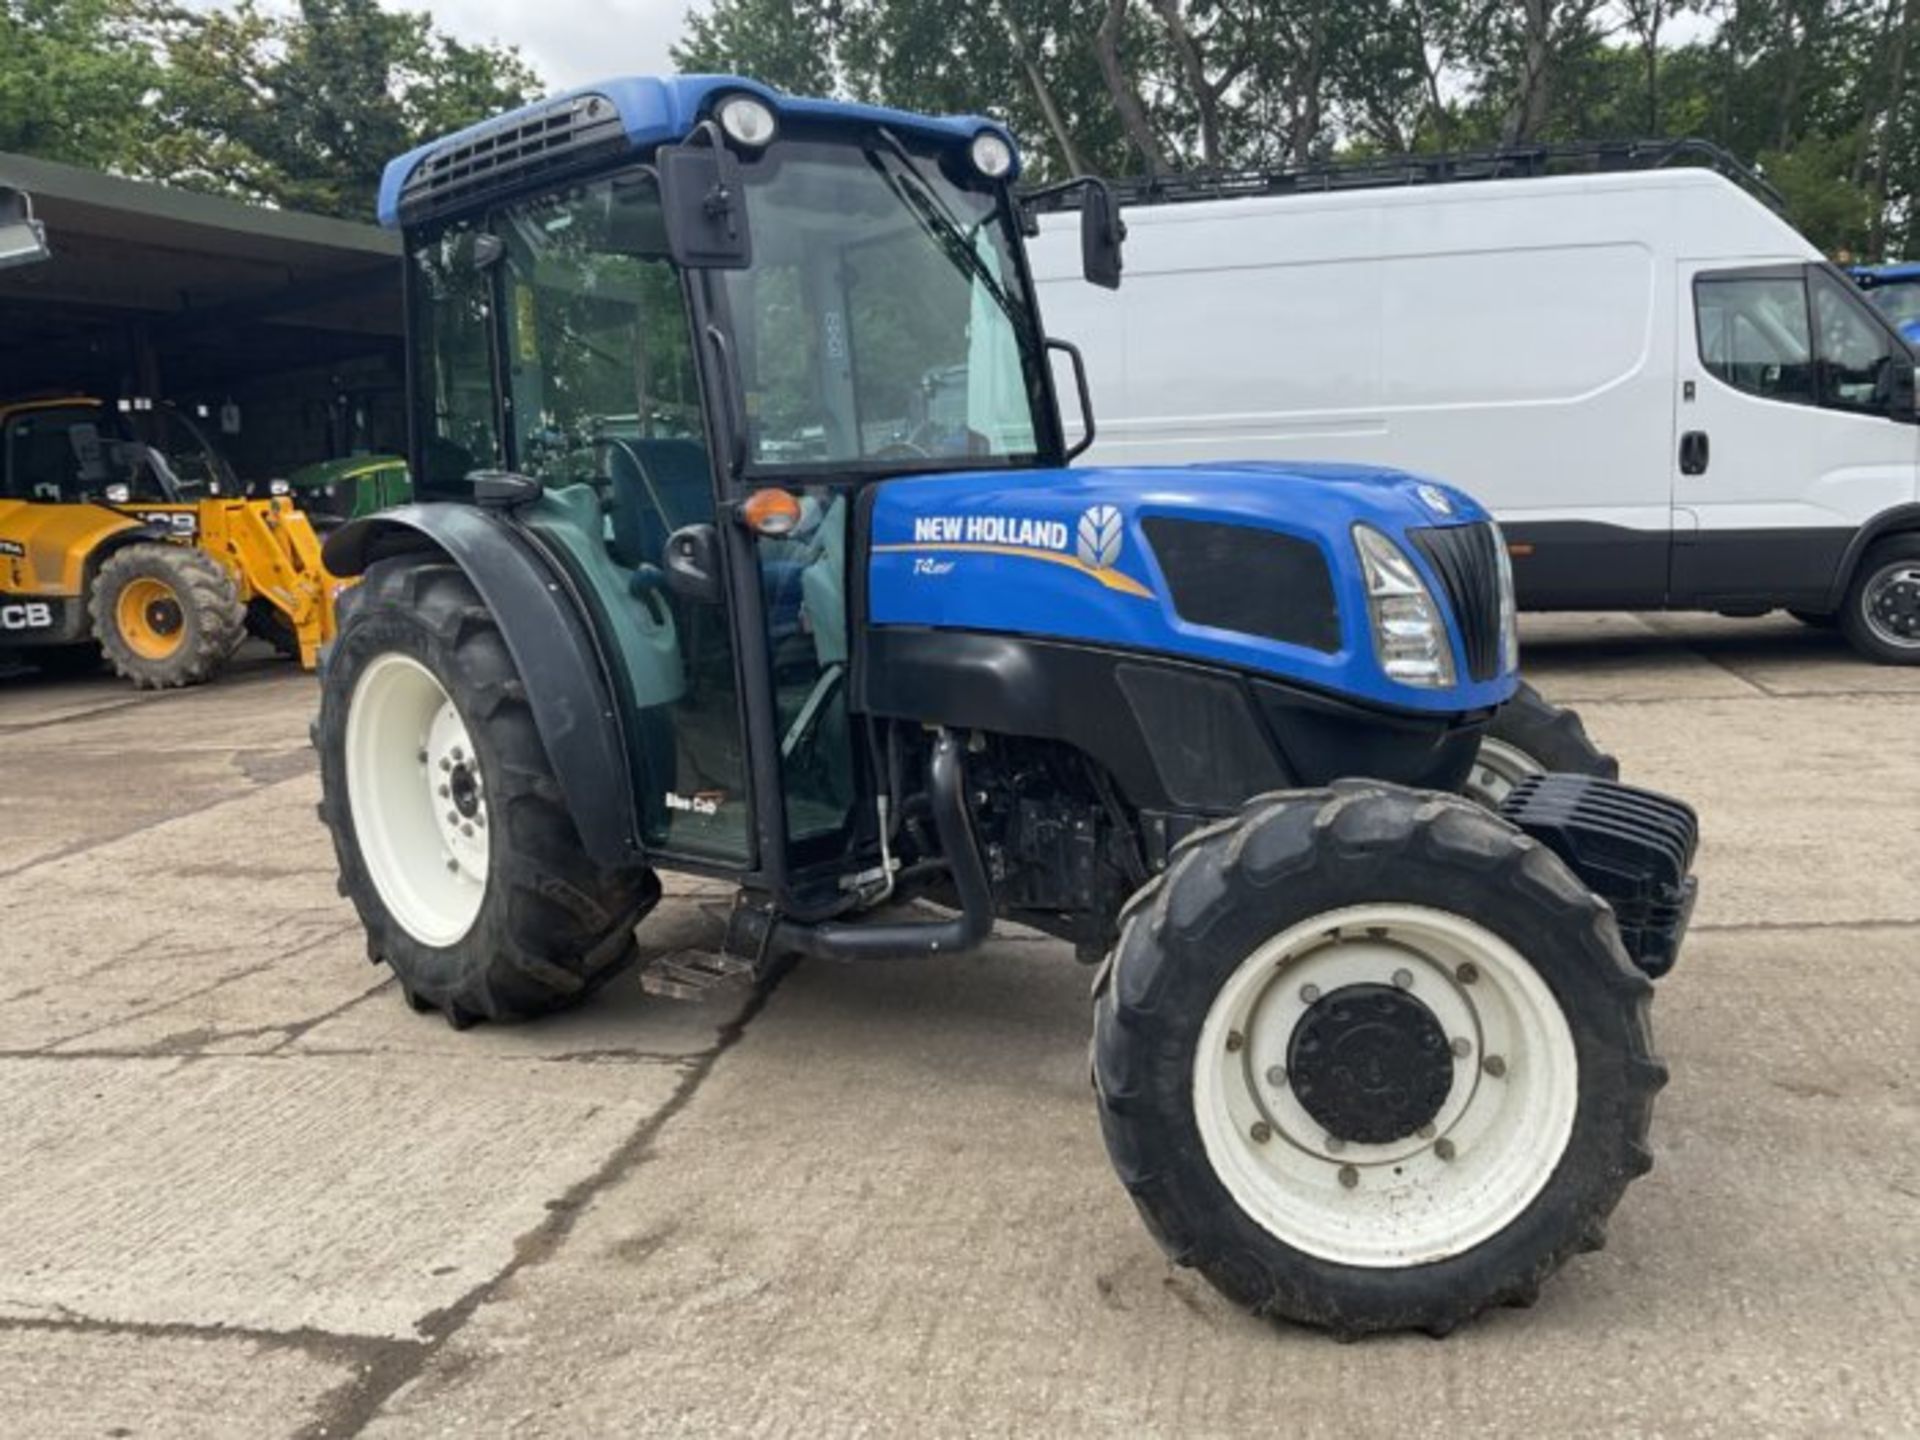 NEW HOLLAND T4.85F 4231 HOURS.